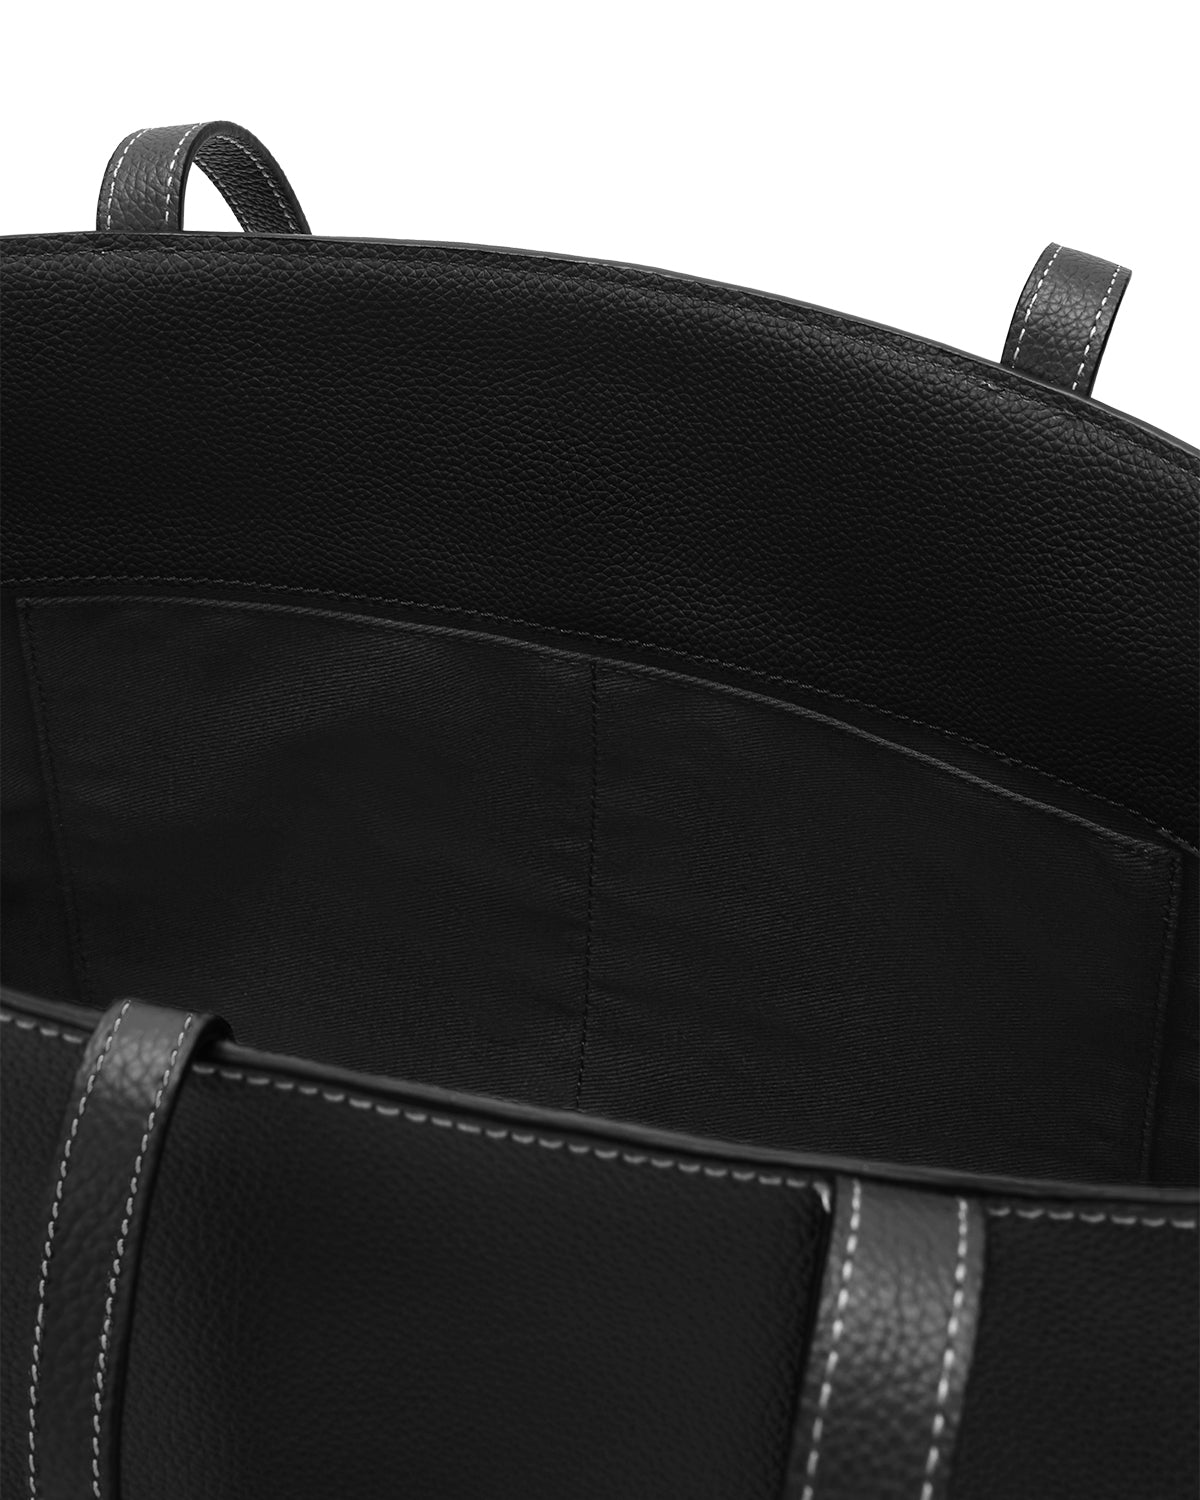 Tokyo Tote (Black Small Grain with Stitching)